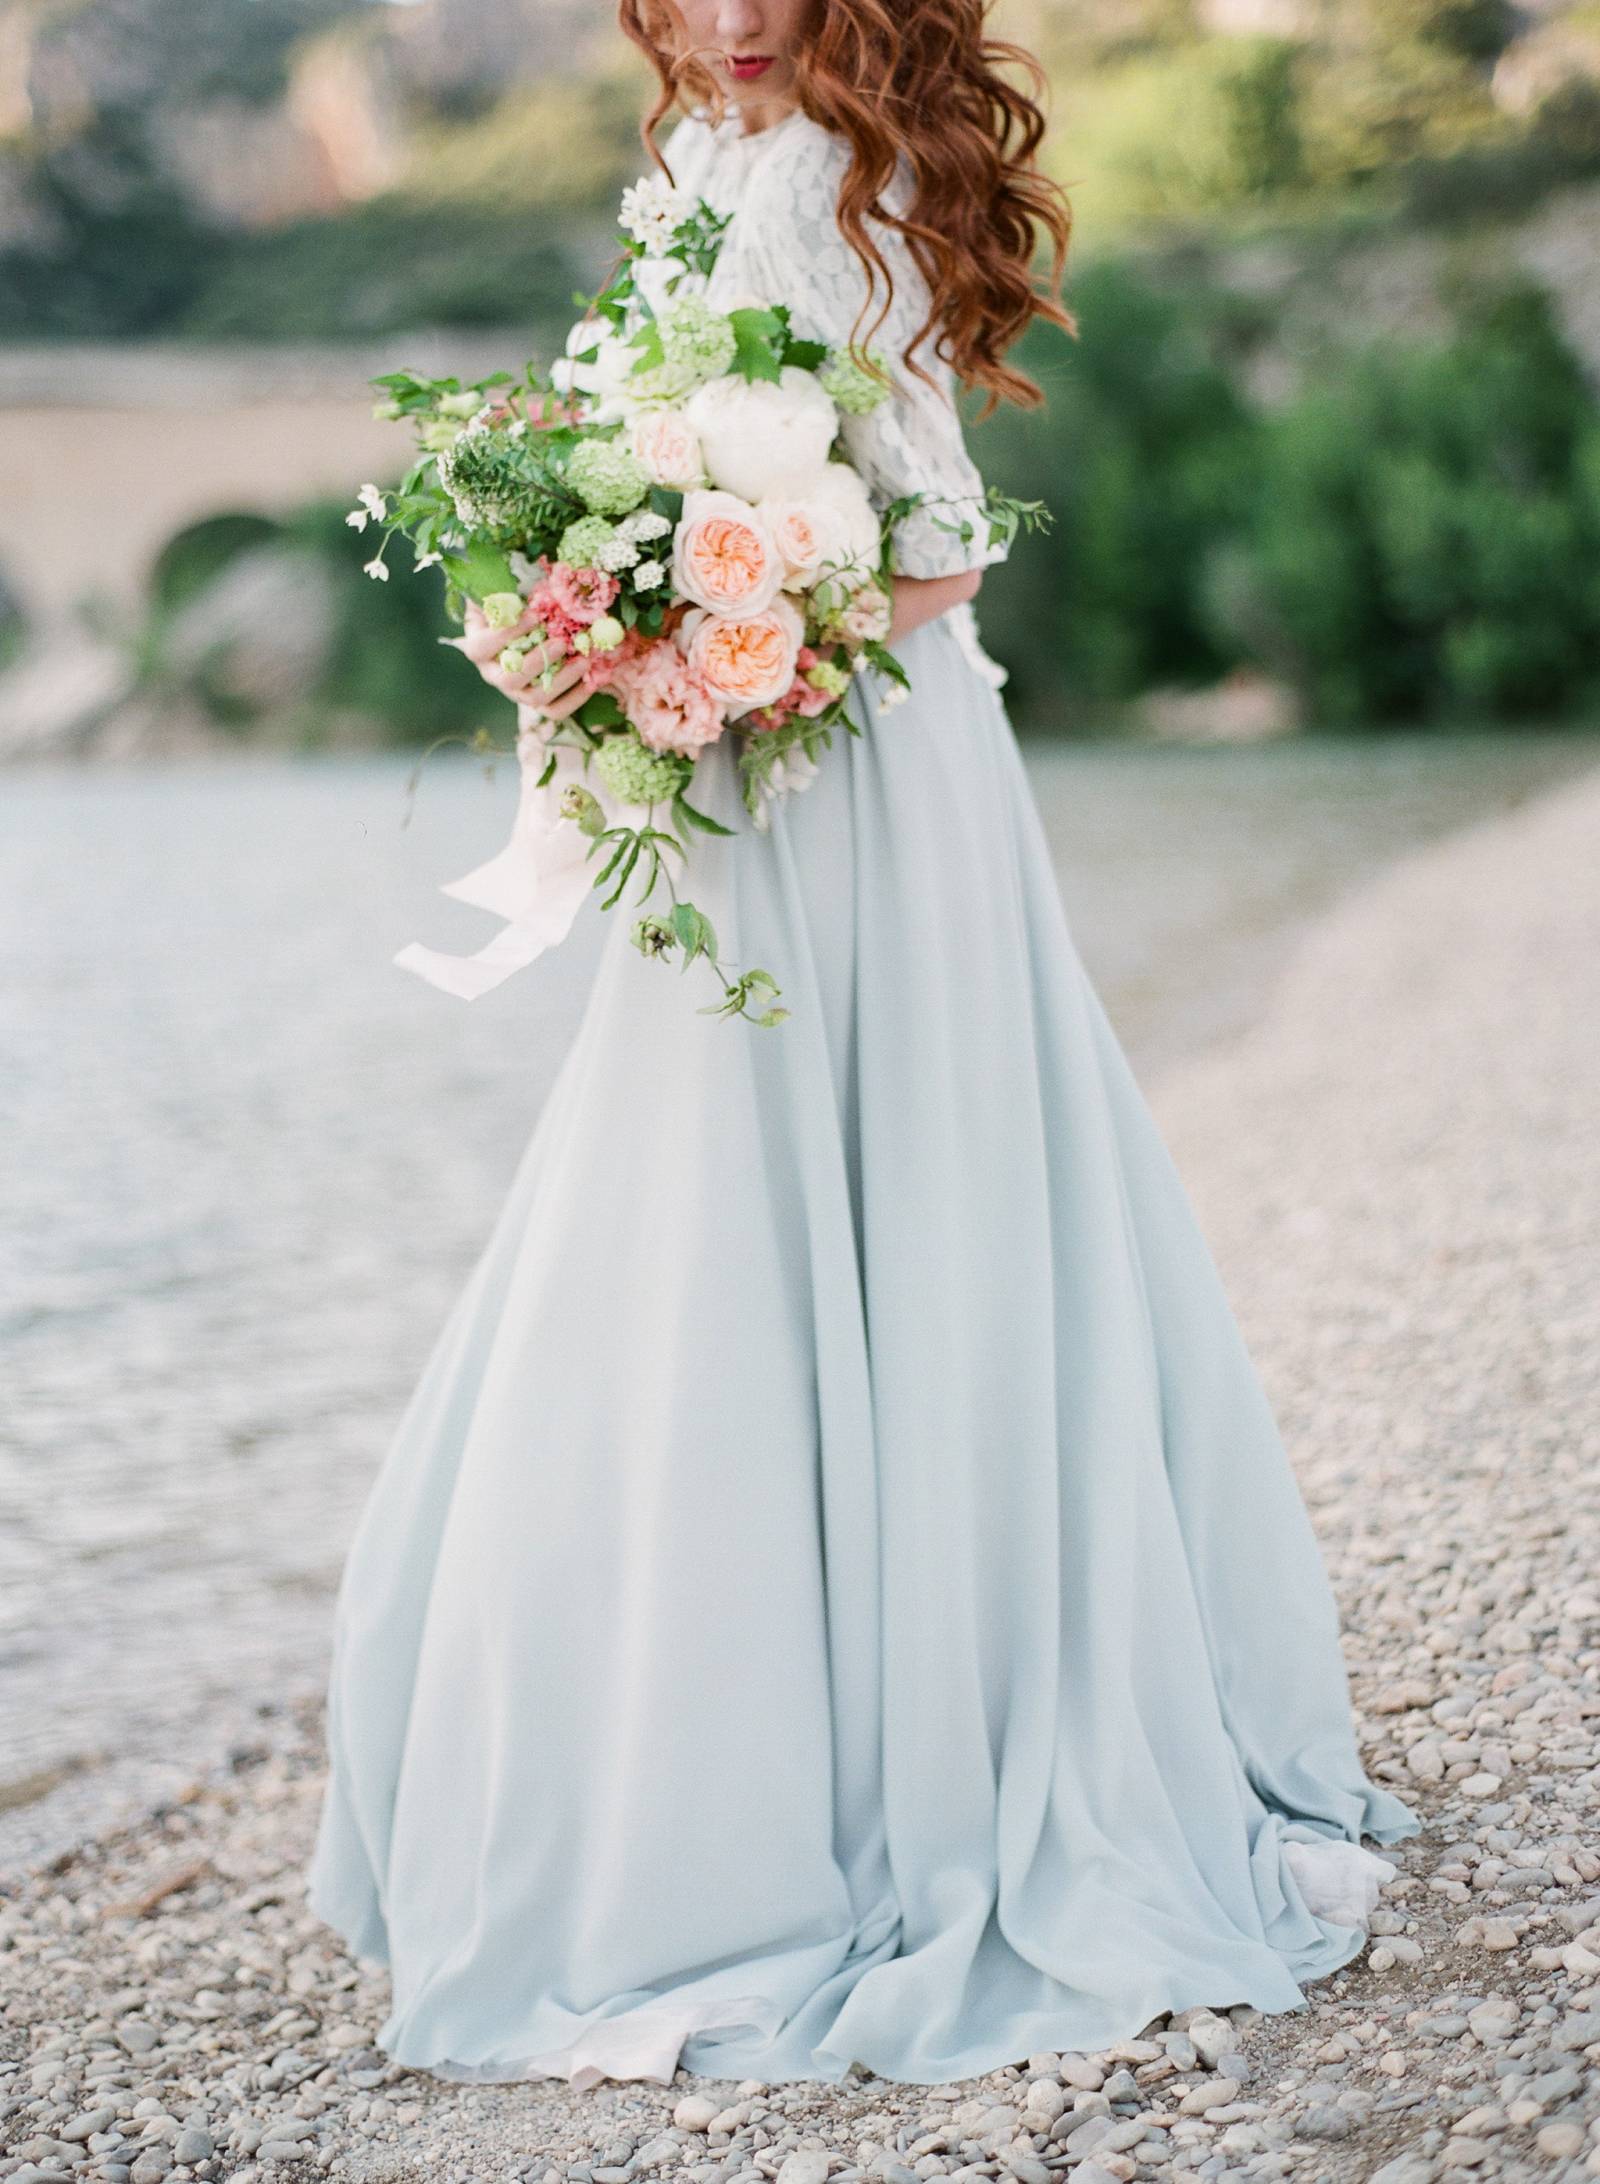 Organic wedding inspiration from the South of France | South of France ...